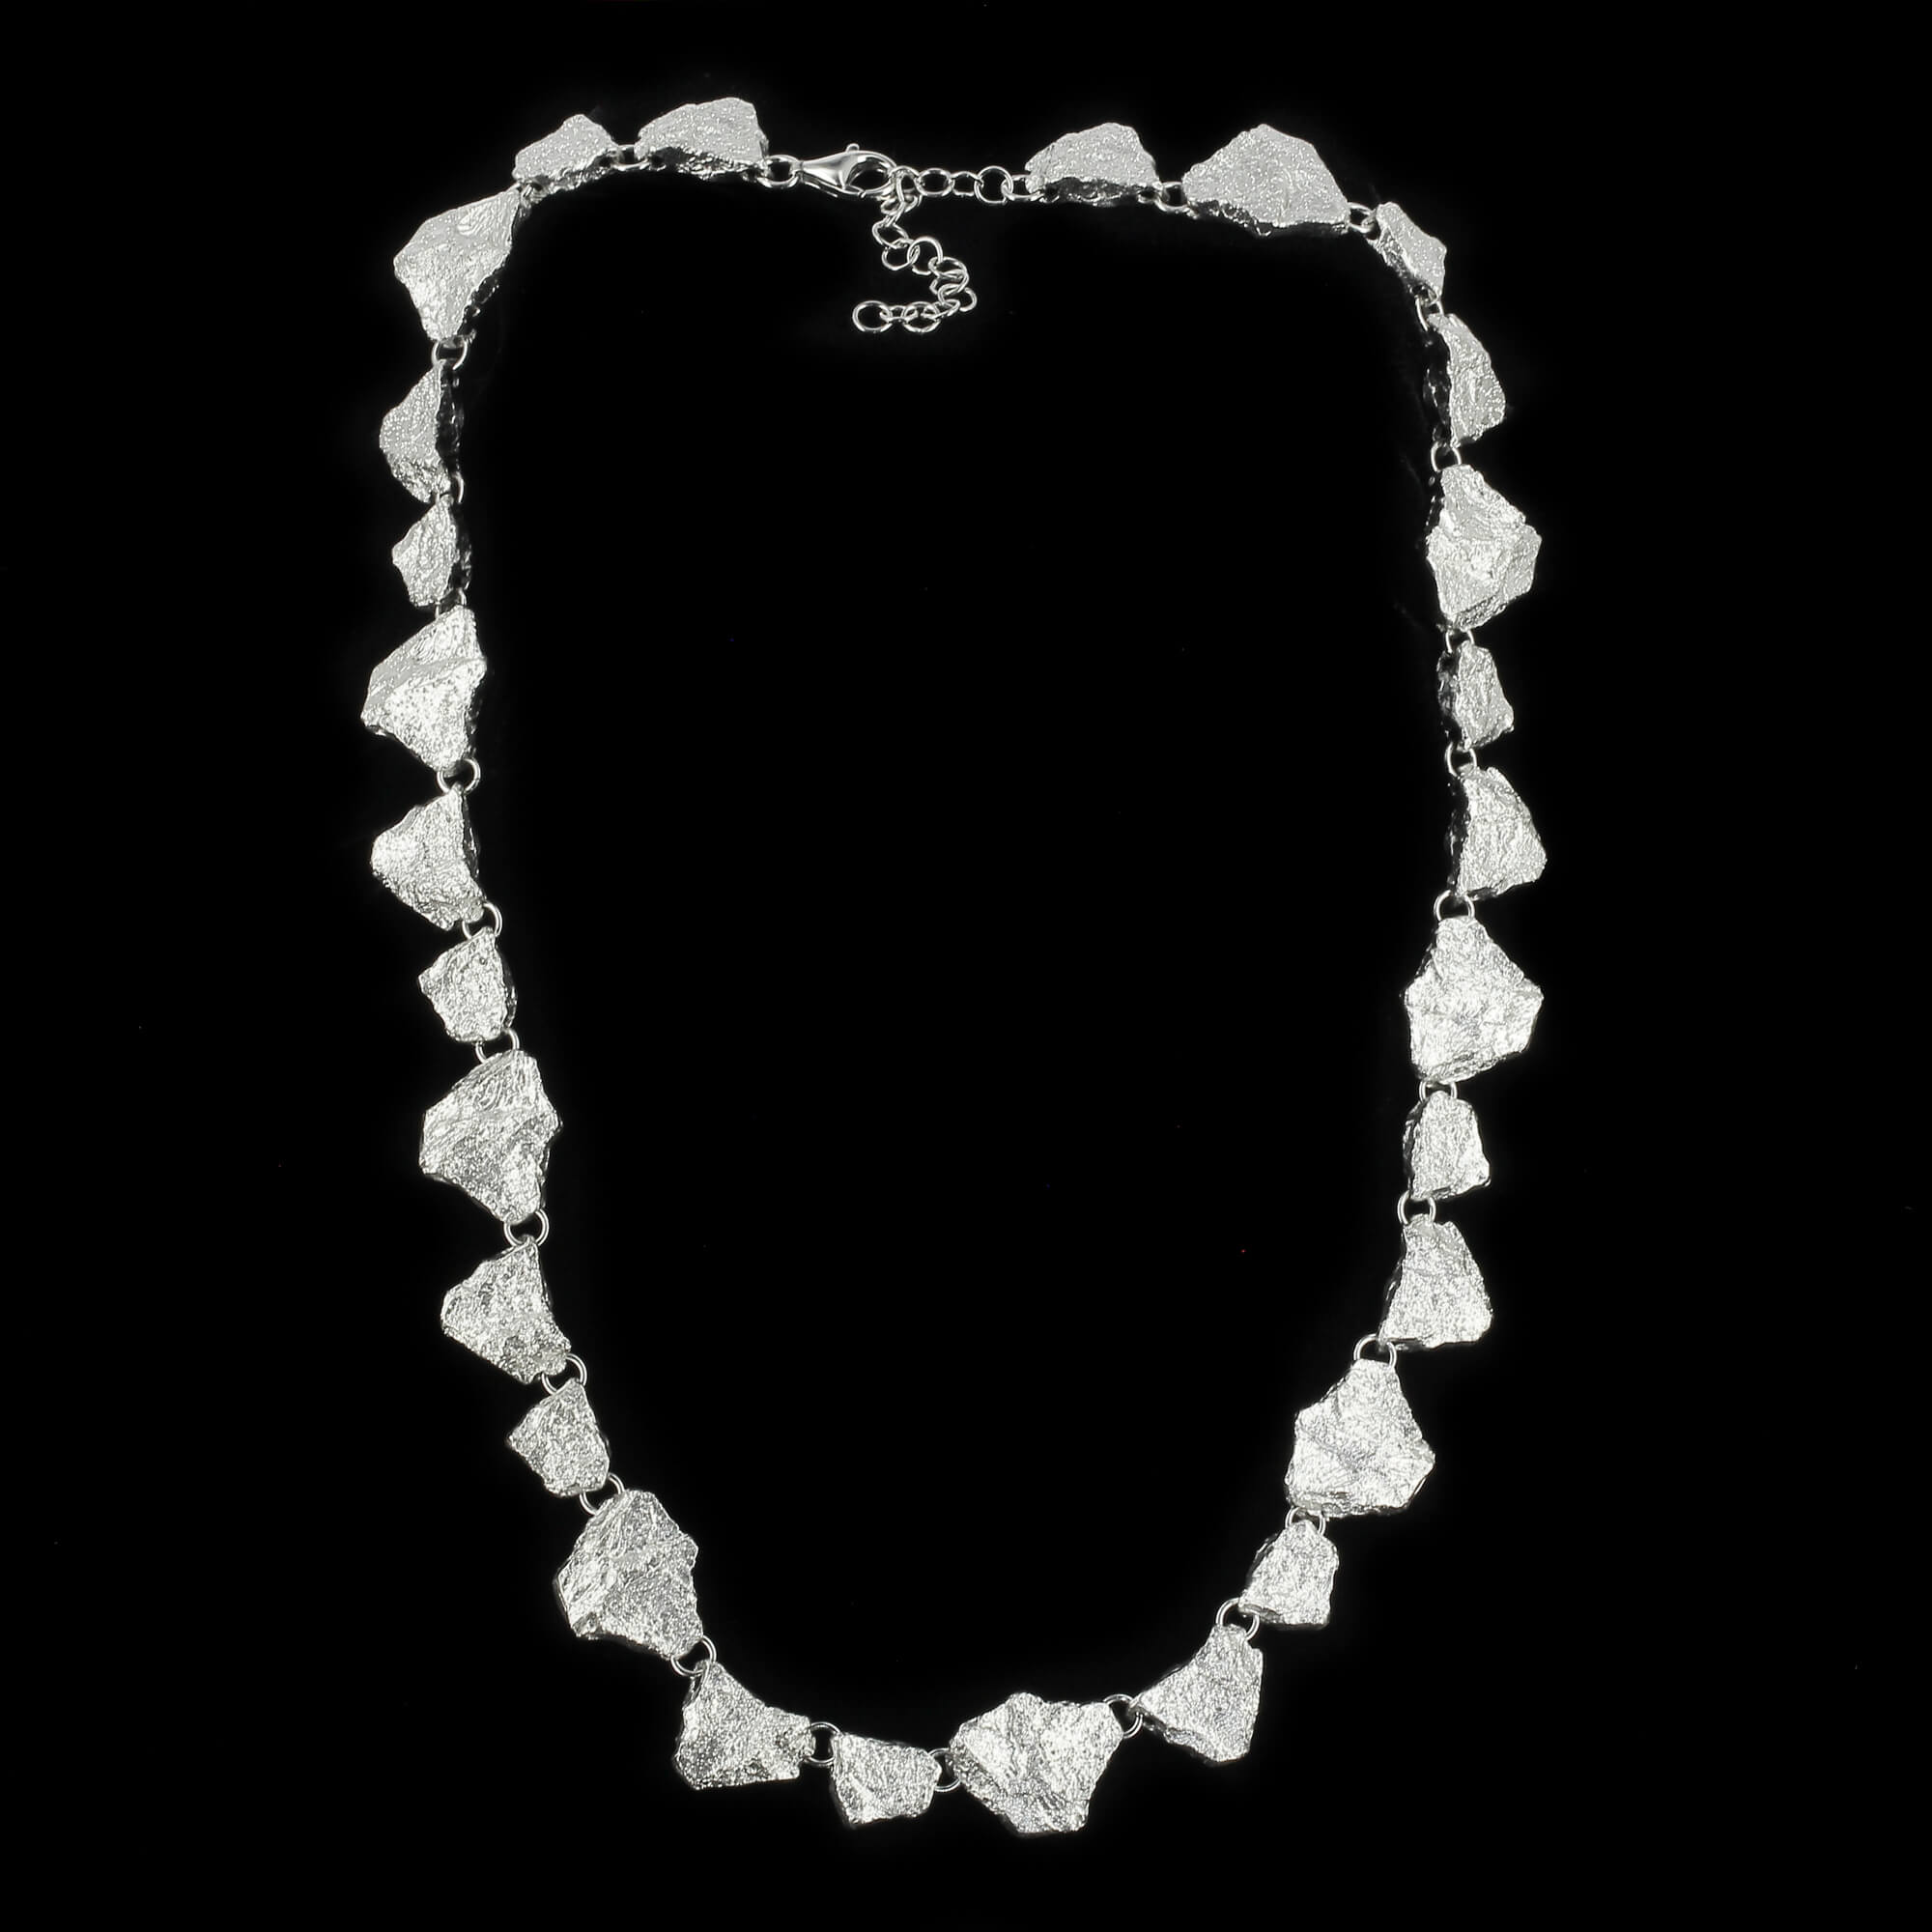 Beautiful stone-shaped silver necklace